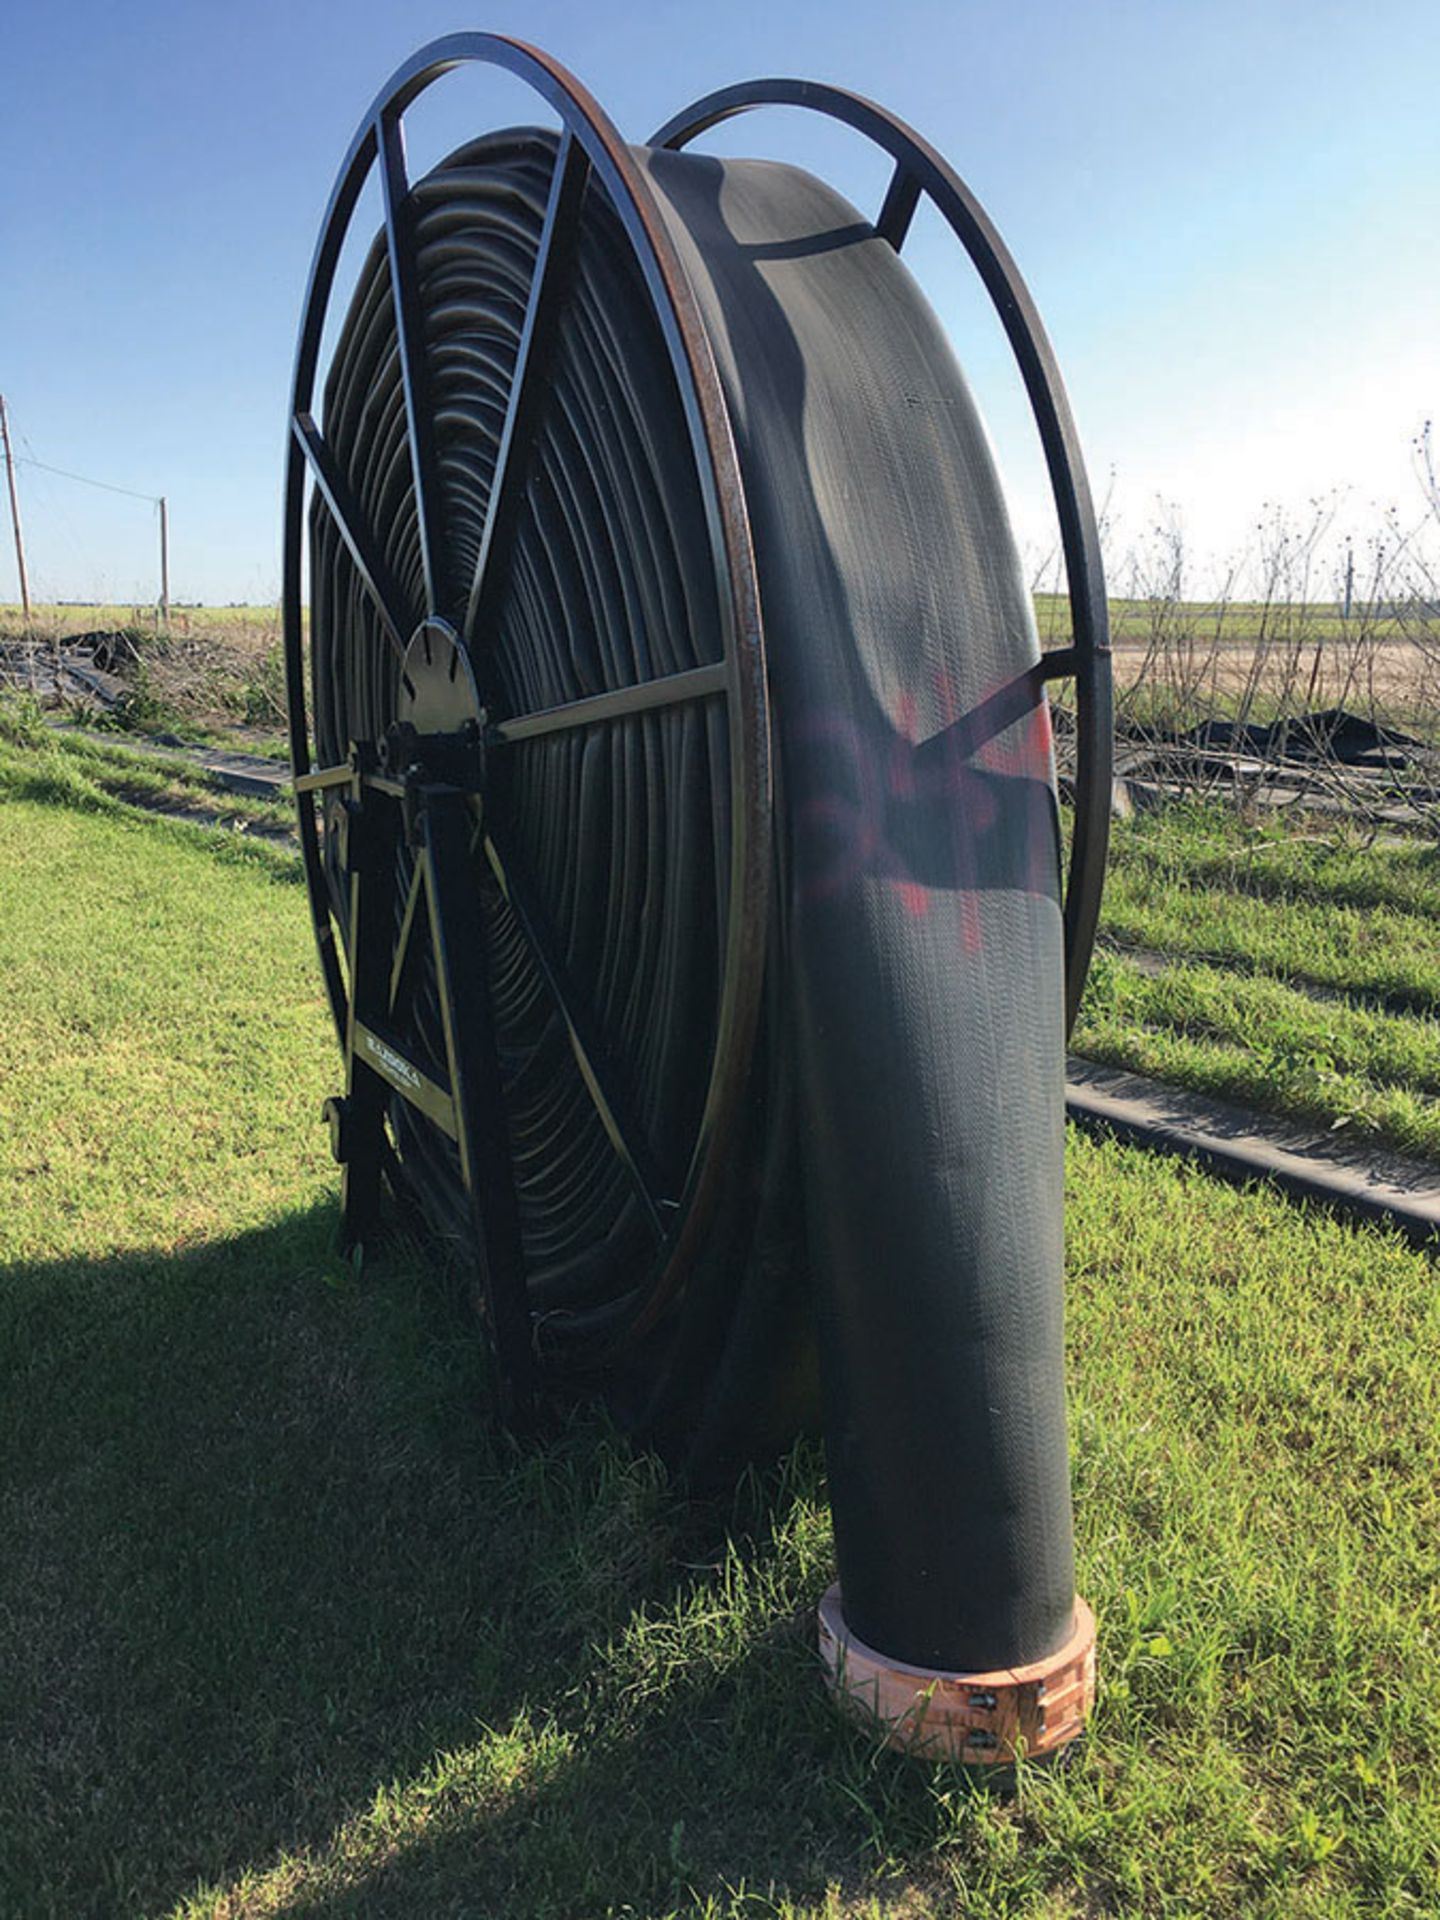 660ft. of 12in. LAY FLAT HOSE ON BAZOOKA HOSE REELS, EACH UNIT NUMBERED SEPARATELY WITH PAINT - Image 19 of 19